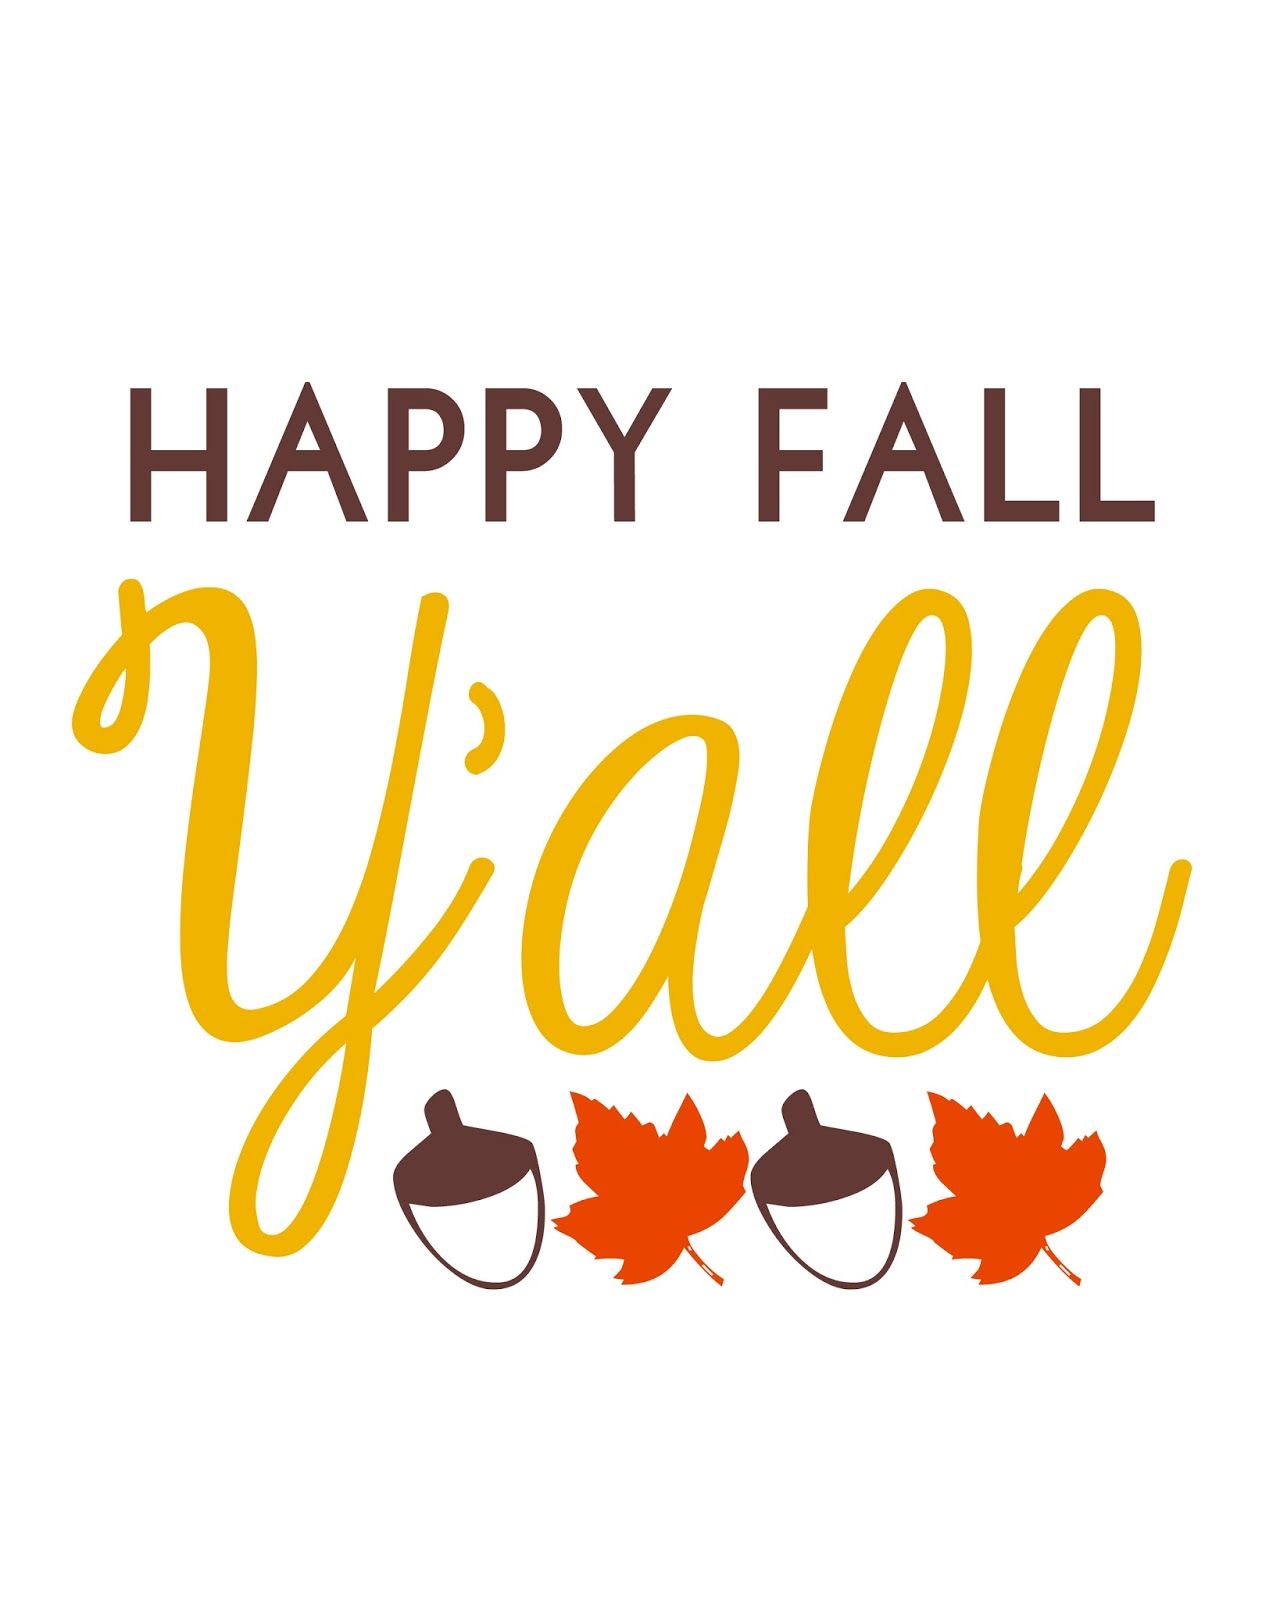 Happy Fall Background